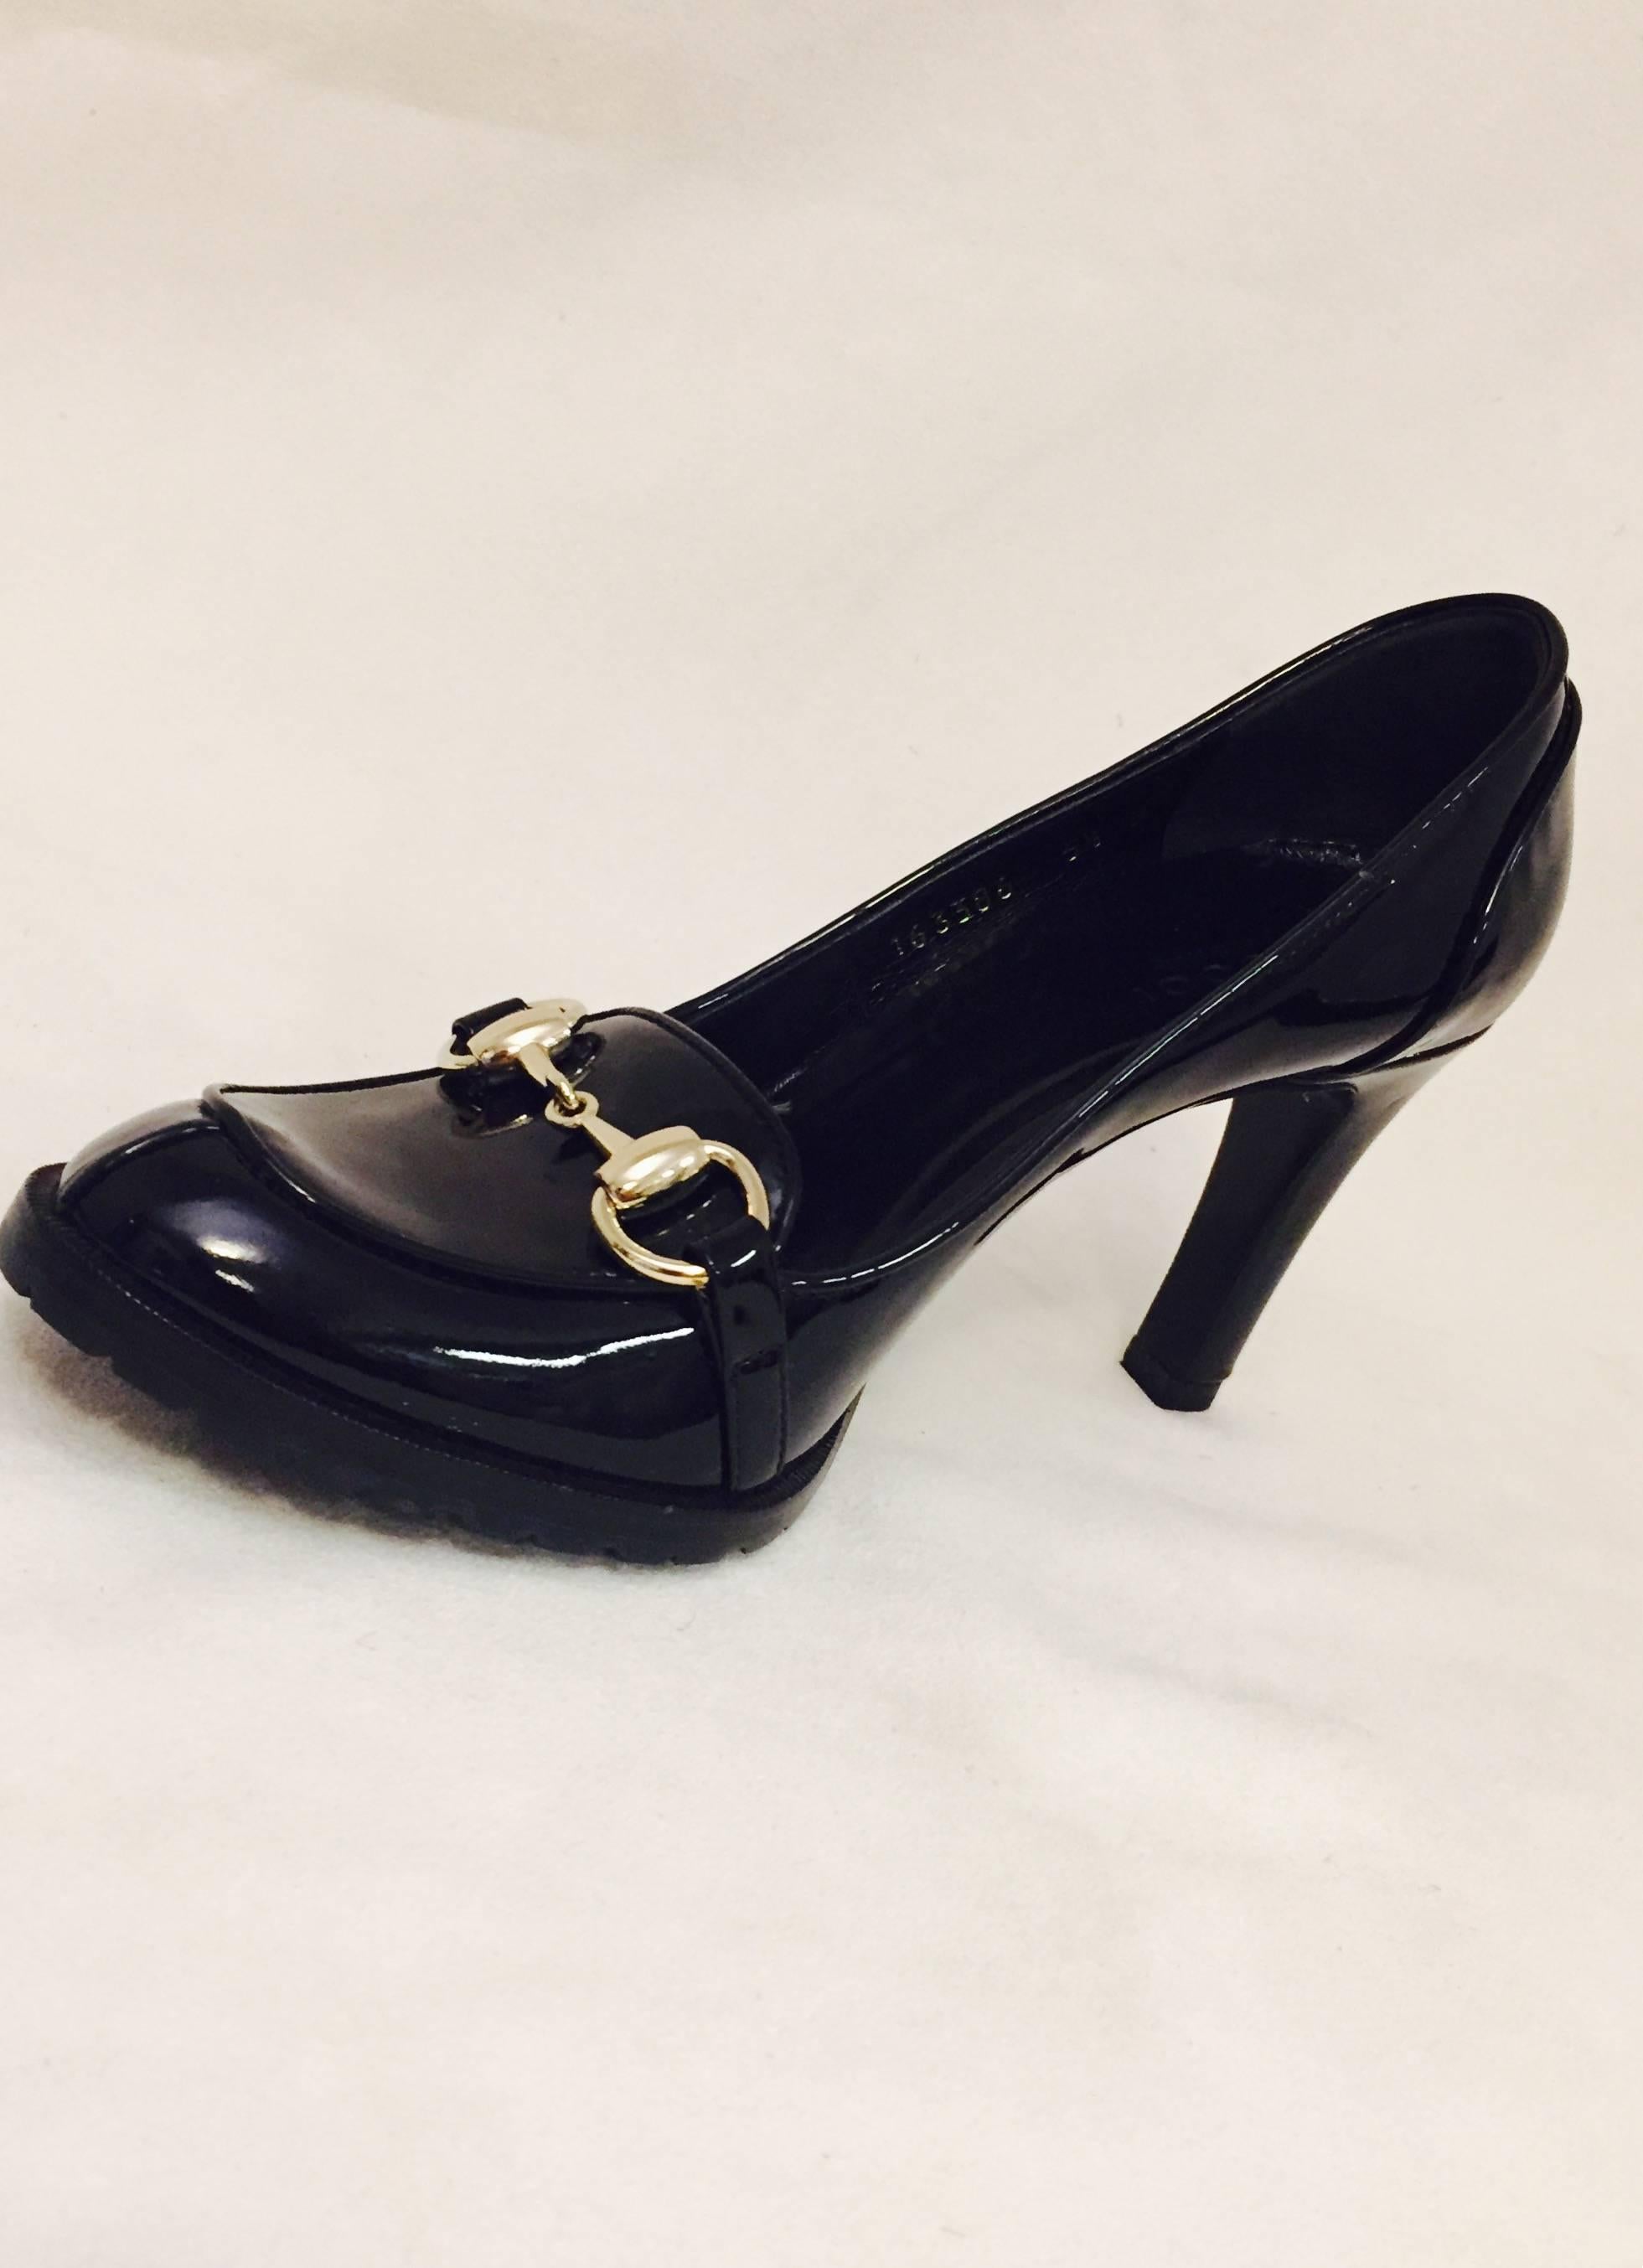 Gucci black patent leather round toe pumps with tonal stitching.  This pair is in excellent condition down to its rubber soles, that are great to prevent slipping on icy sidewalks.   They have covered 3 1/2